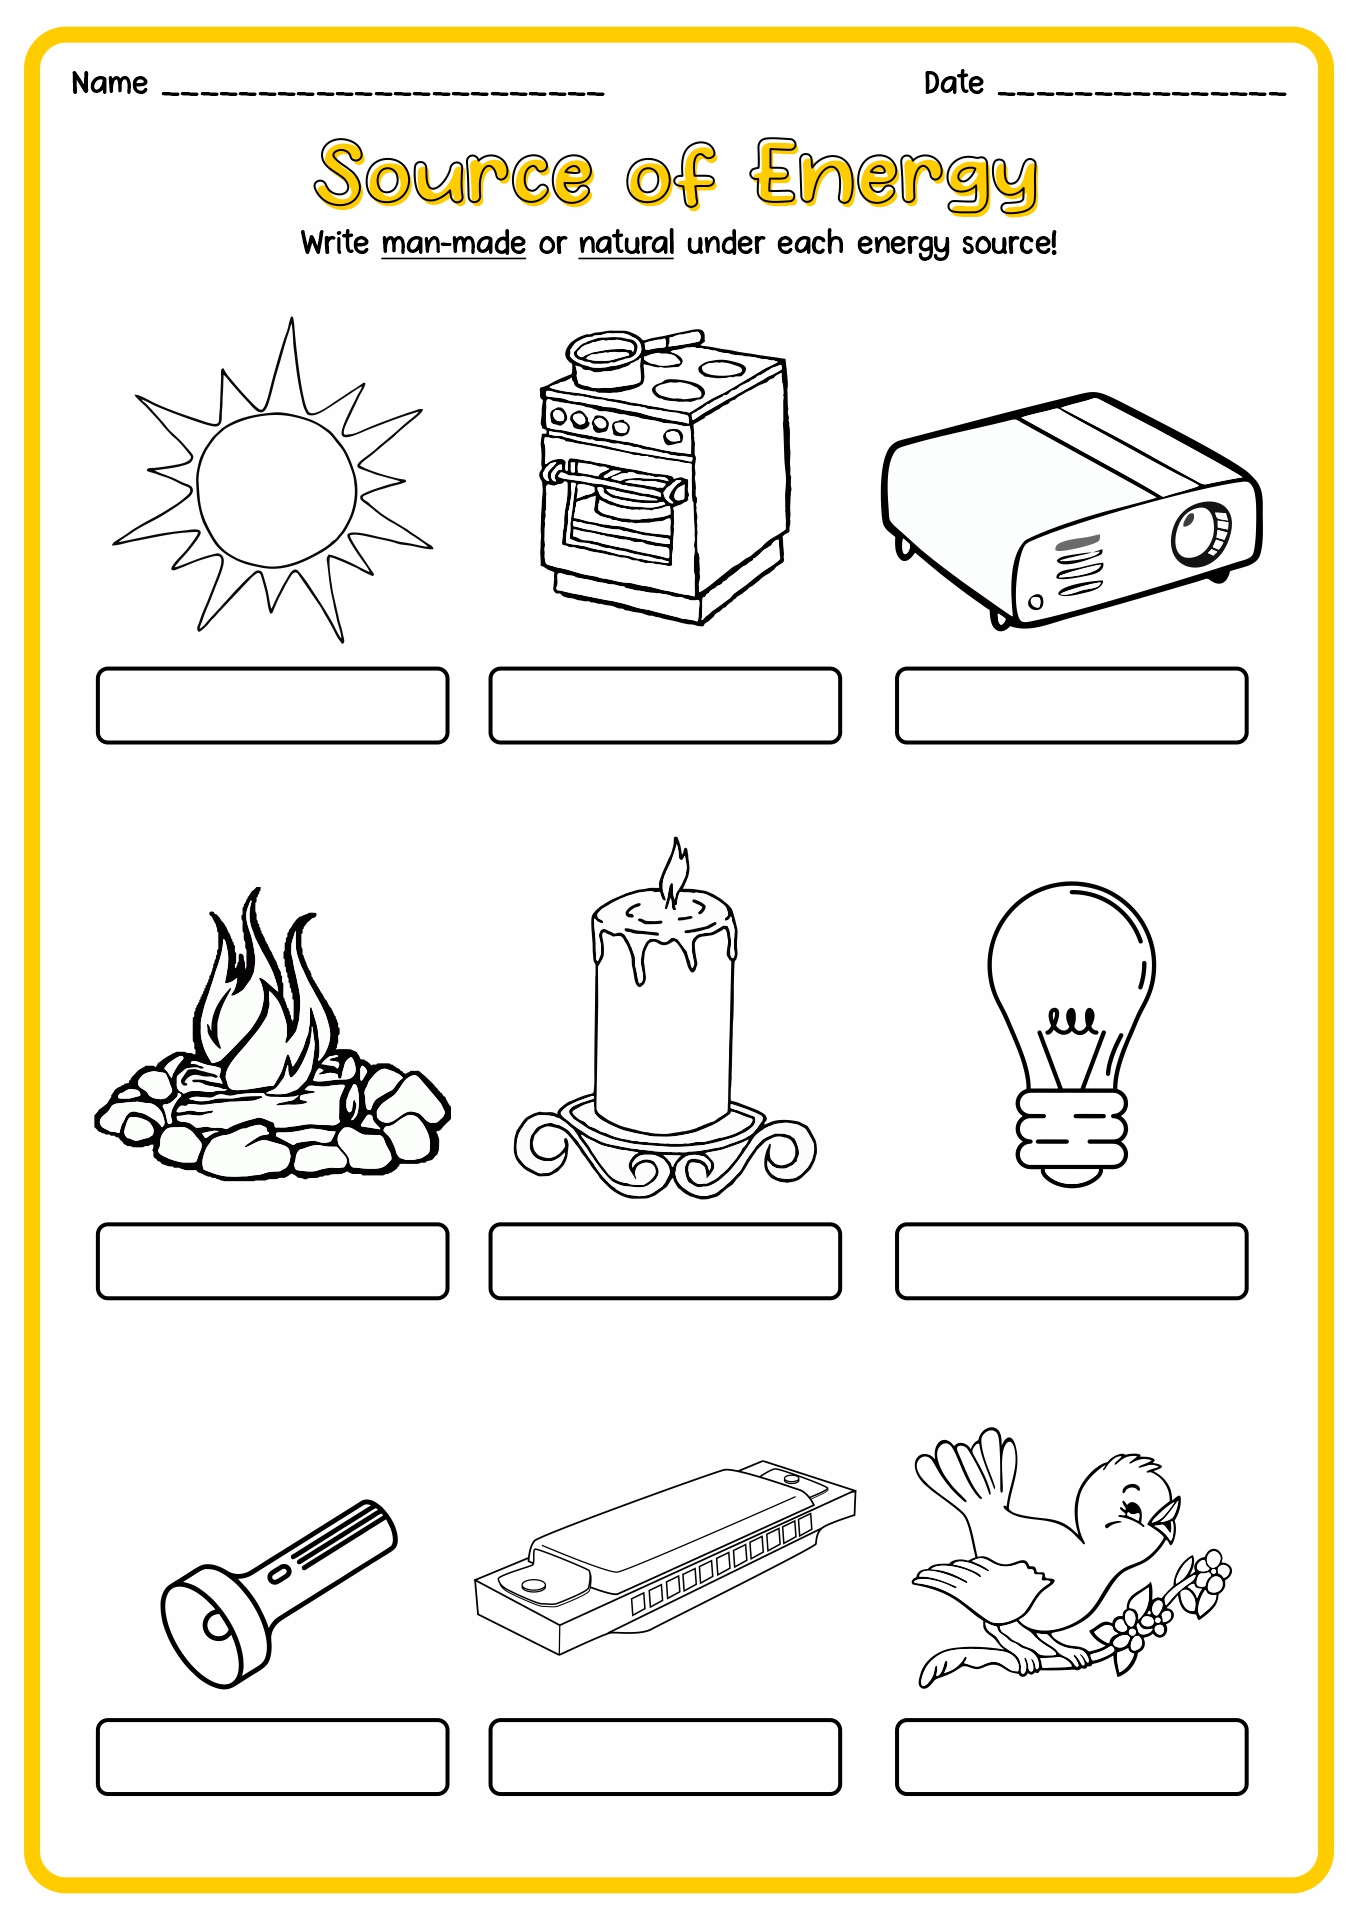 Science Worksheets Light Energy and Heat Image